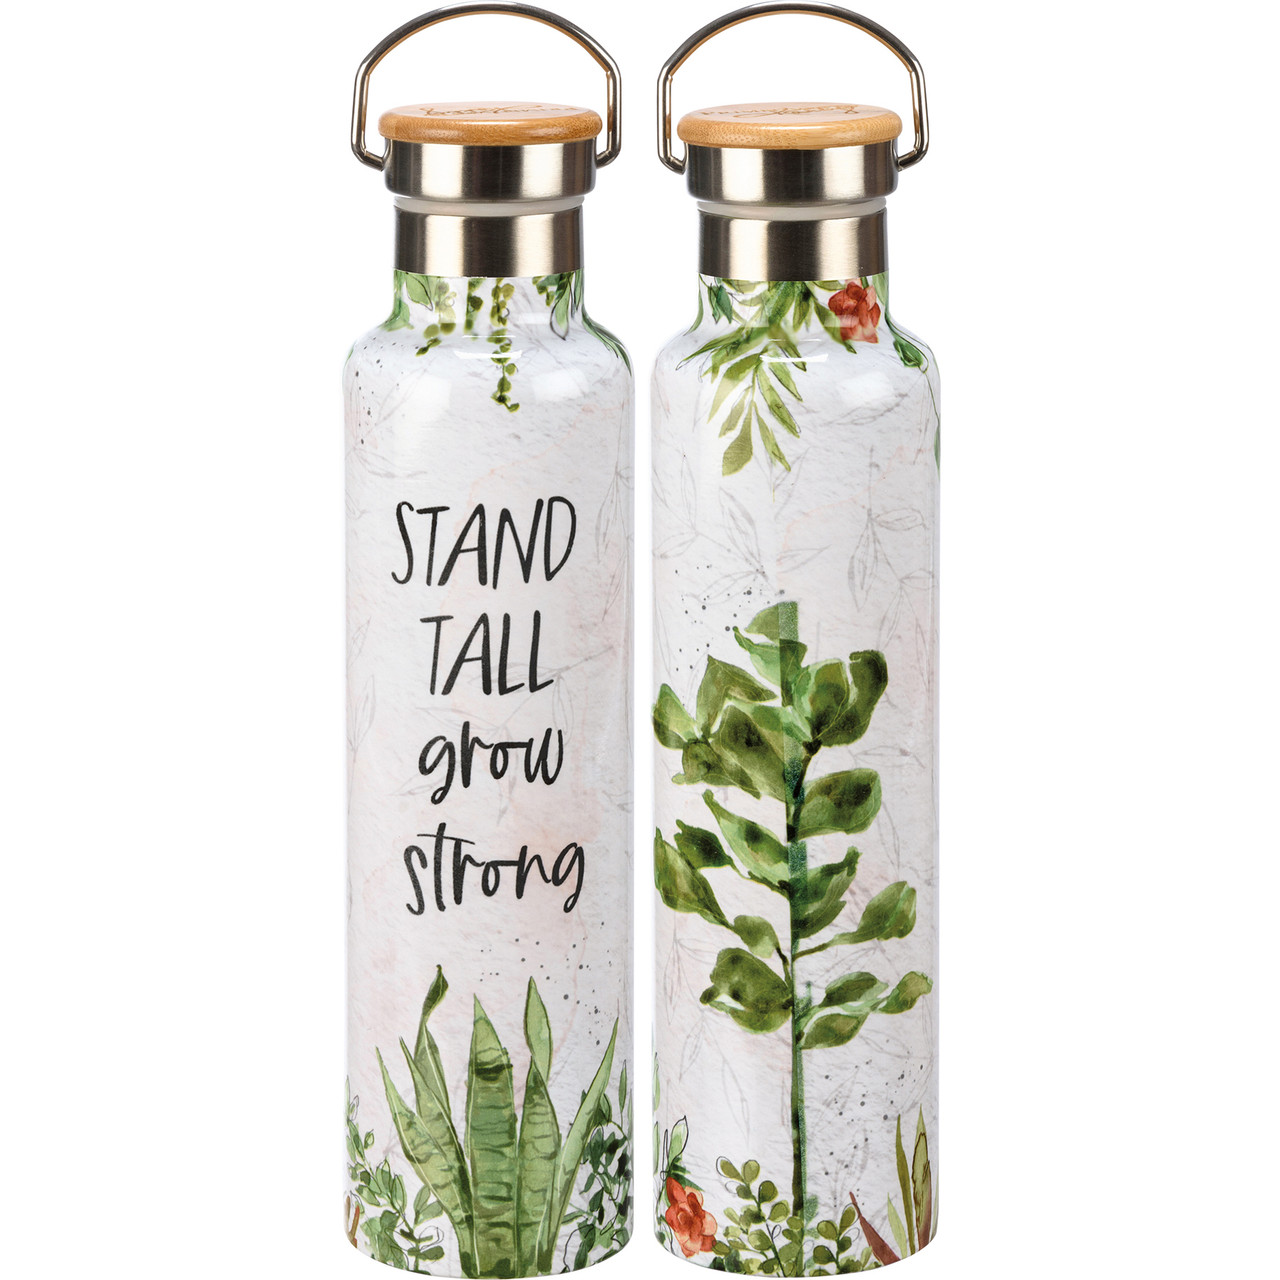 https://cdn11.bigcommerce.com/s-s8dcj5rpmy/images/stencil/1280x1280/products/4517/13896/water-bottles__75897.1682618849.jpg?c=2